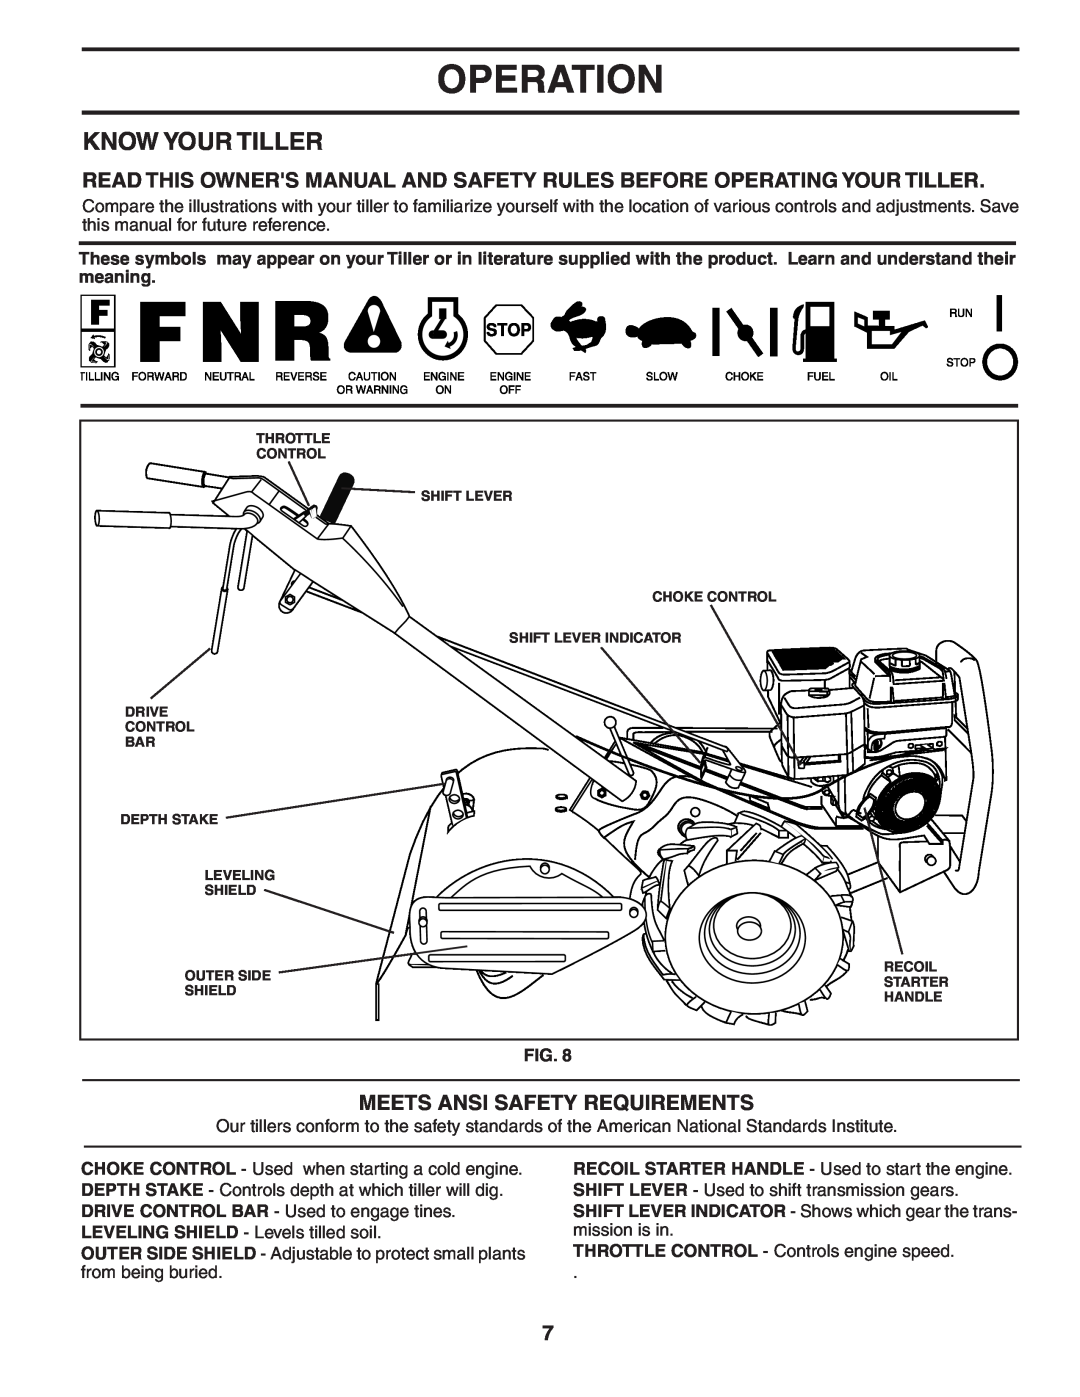 Husqvarna 650CRT owner manual Operation, Know Your Tiller, Meets Ansi Safety Requirements 